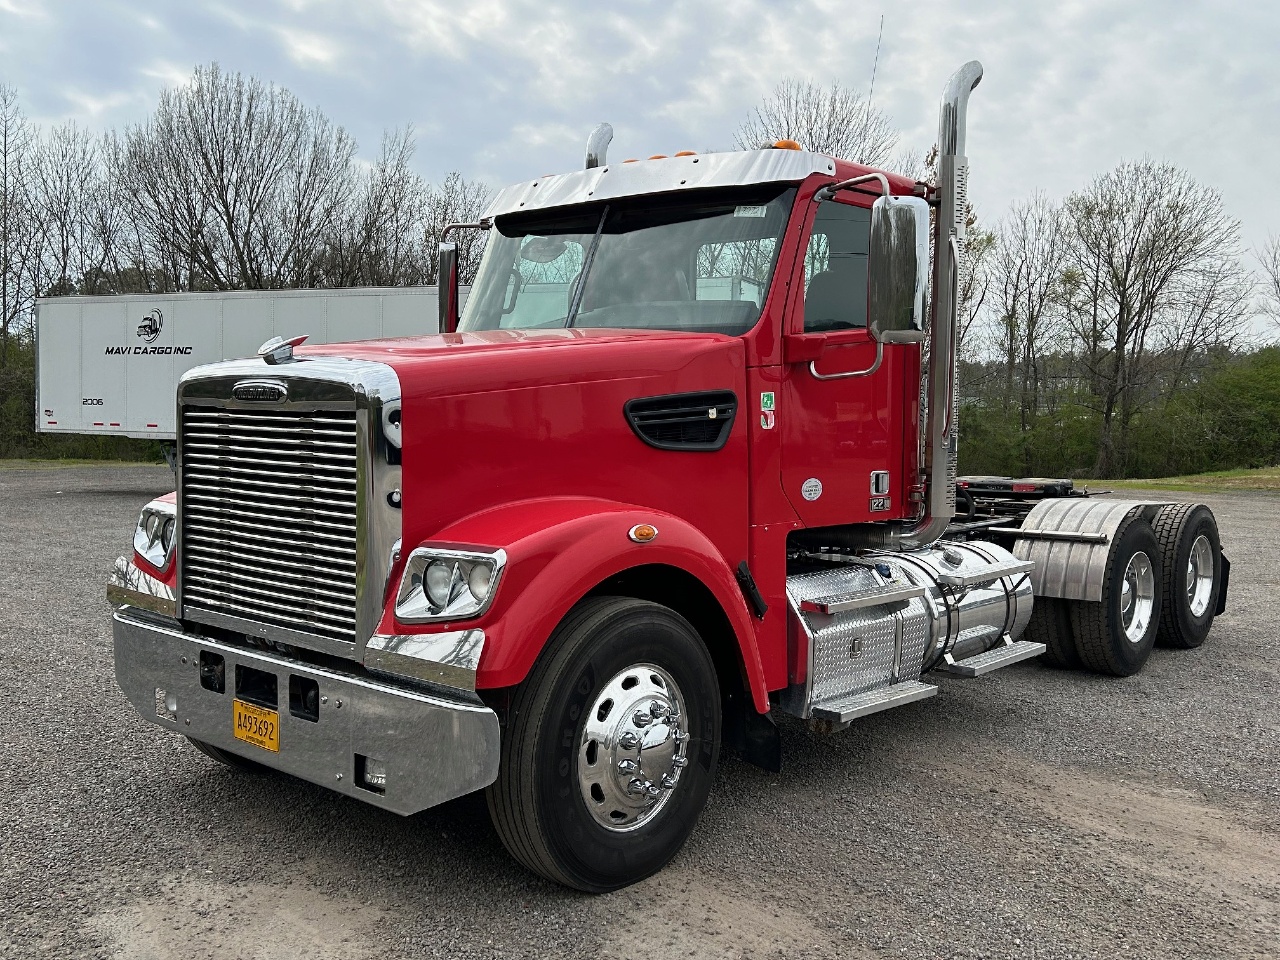 USED 2019 FREIGHTLINER 122SD TANDEM AXLE DAYCAB TRUCK #15283